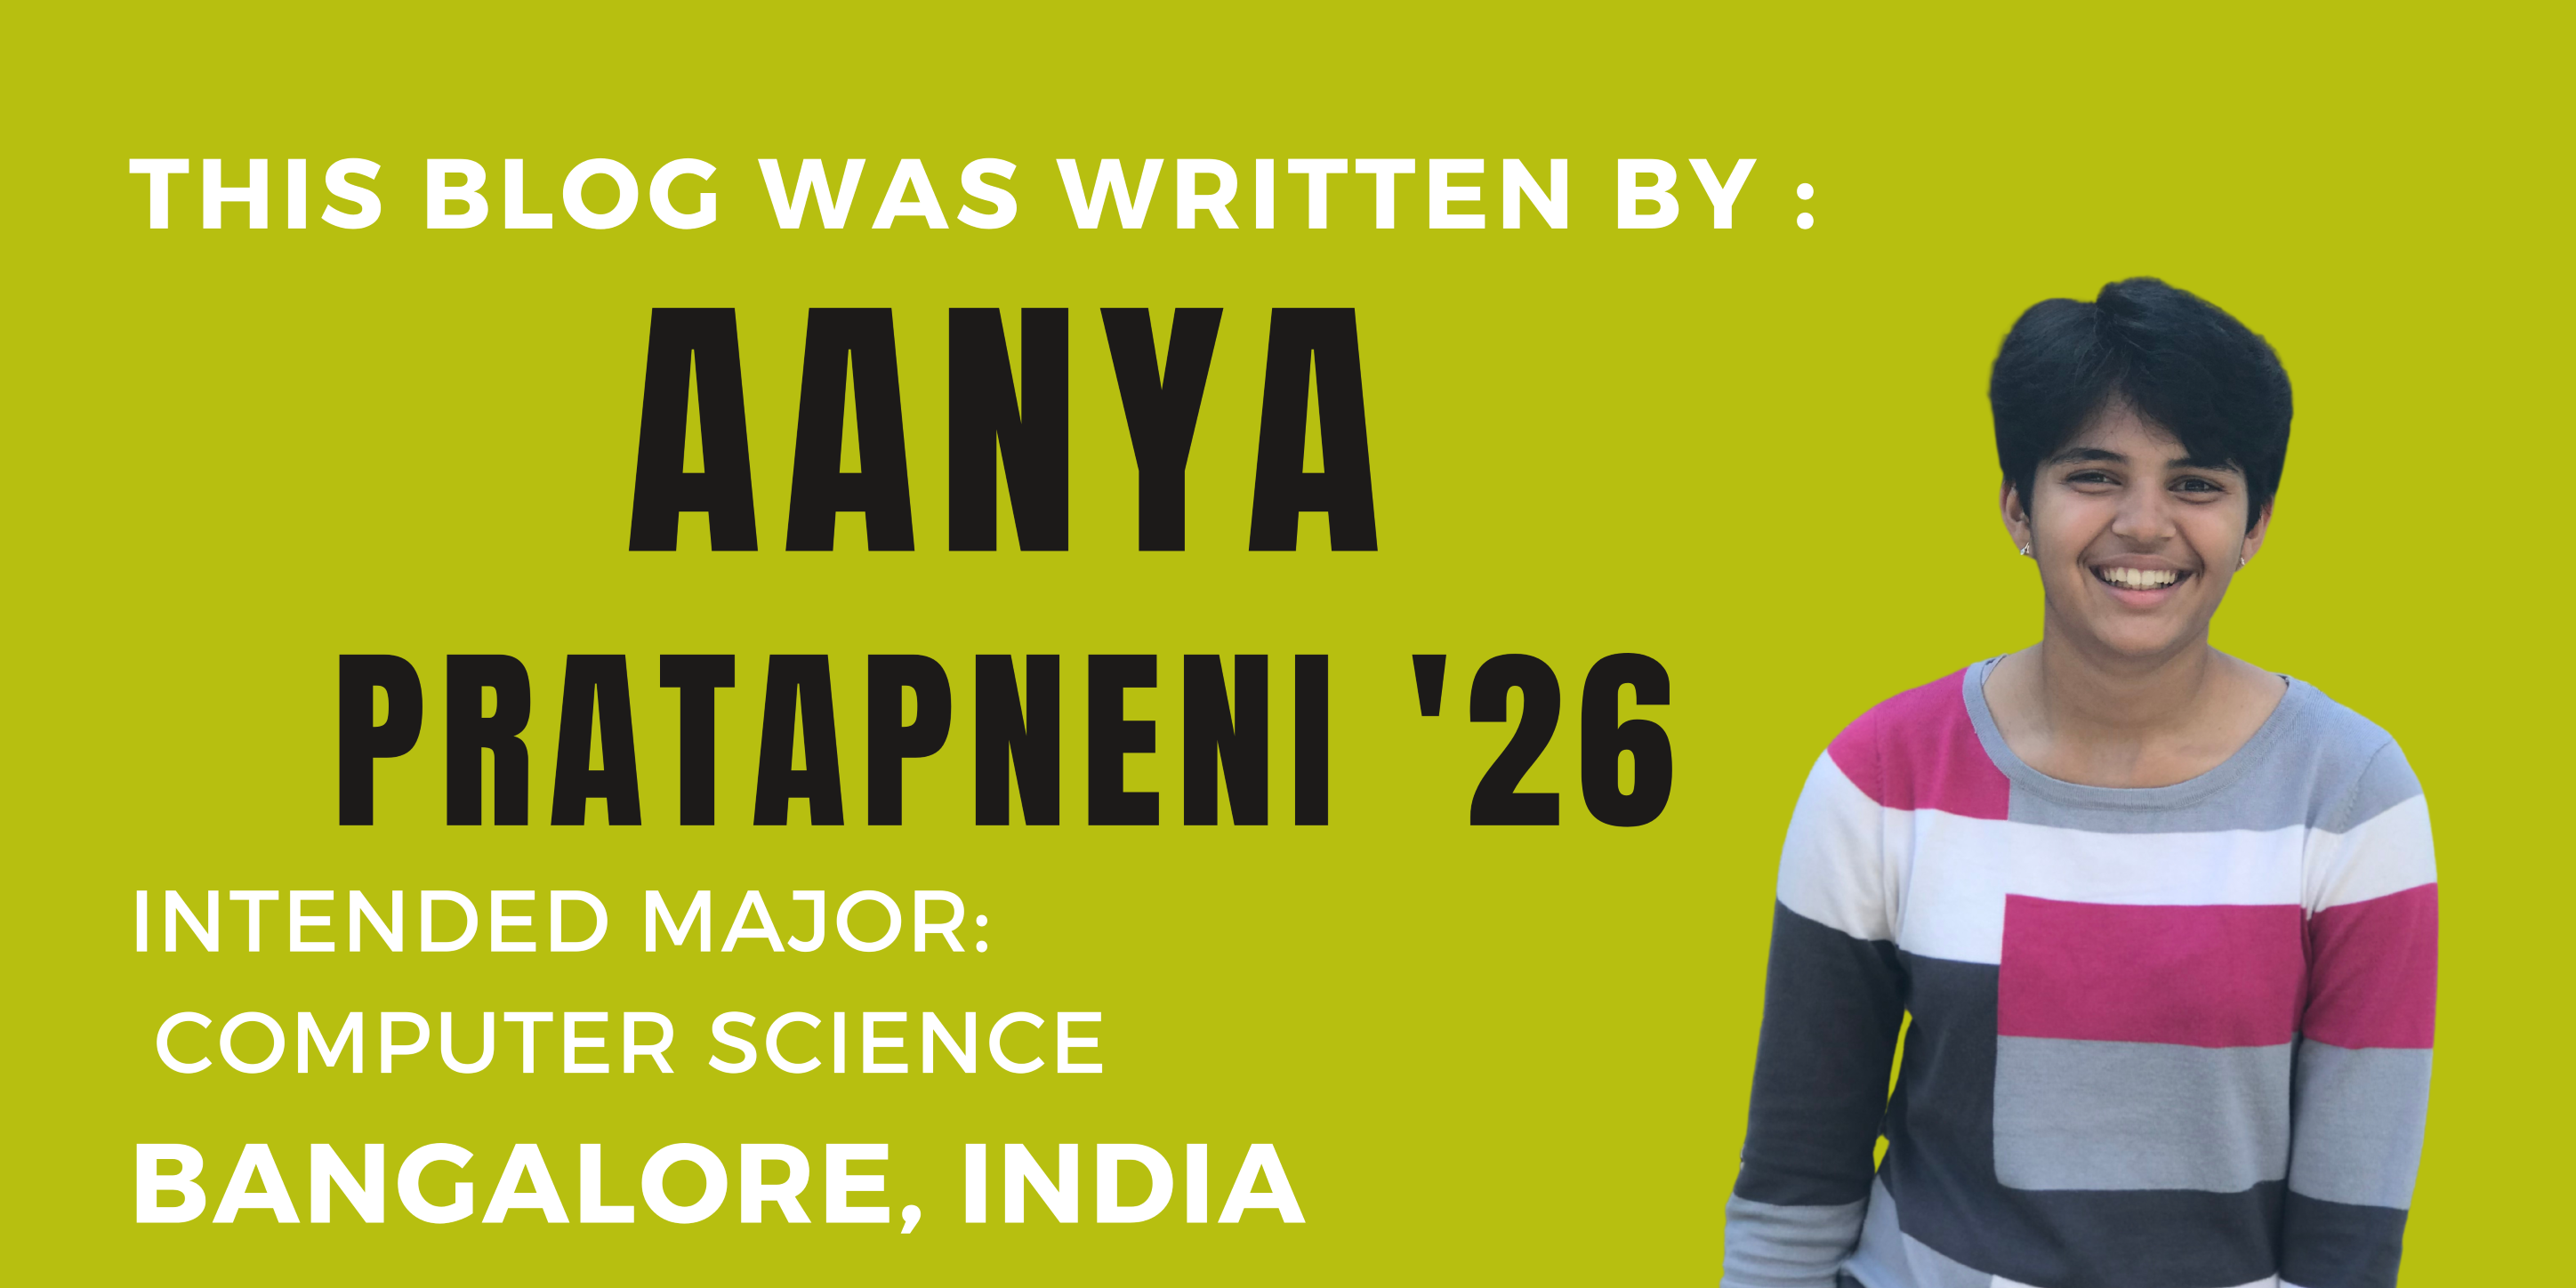 This blog was written by: Aanya Pratapneni '26. Intended major: Computer science. Bangalore, India.